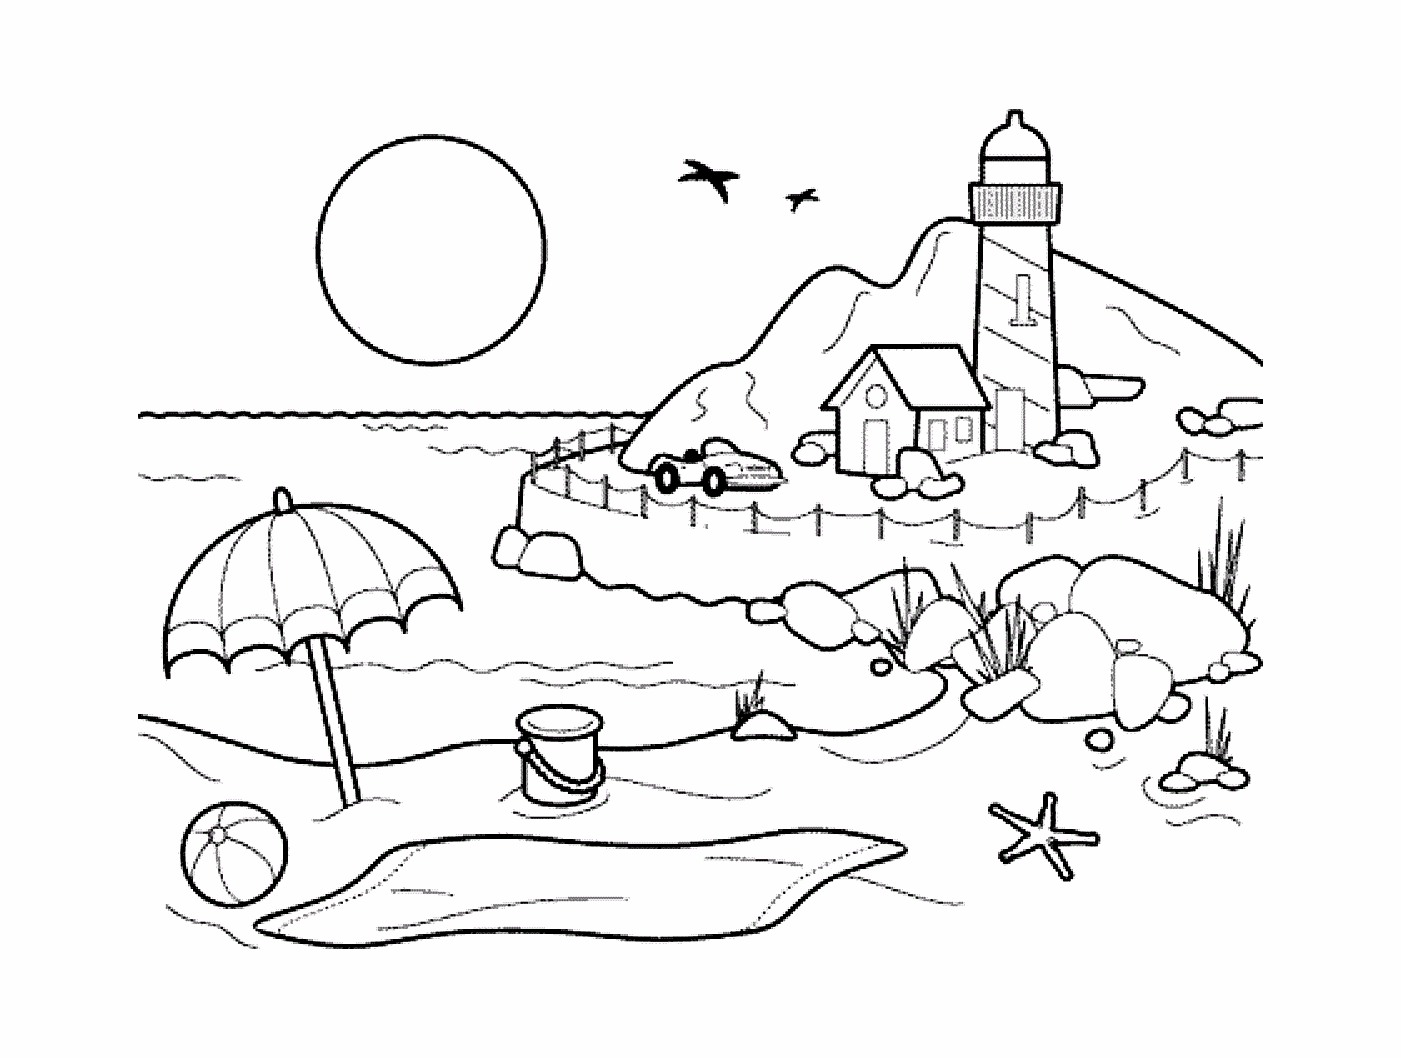 Landscapes - Coloring pages for adults : coloring-landscapes-to-color-2